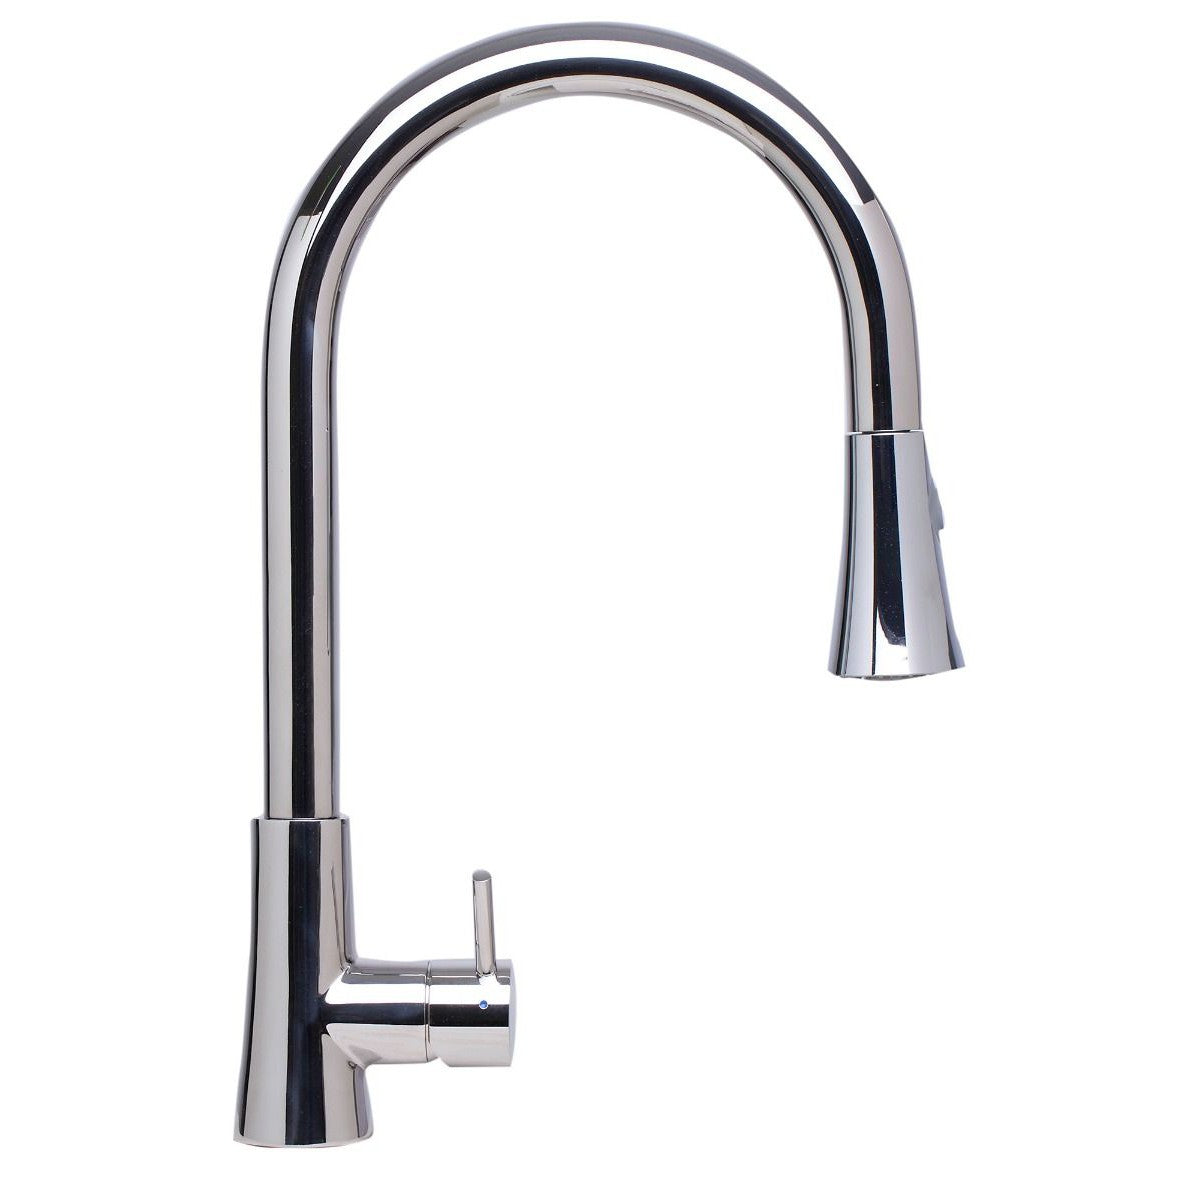 ALFI Brand AB2034-PSS Solid Polished Stainless Steel Pull Down Single Hole Kitchen Faucet